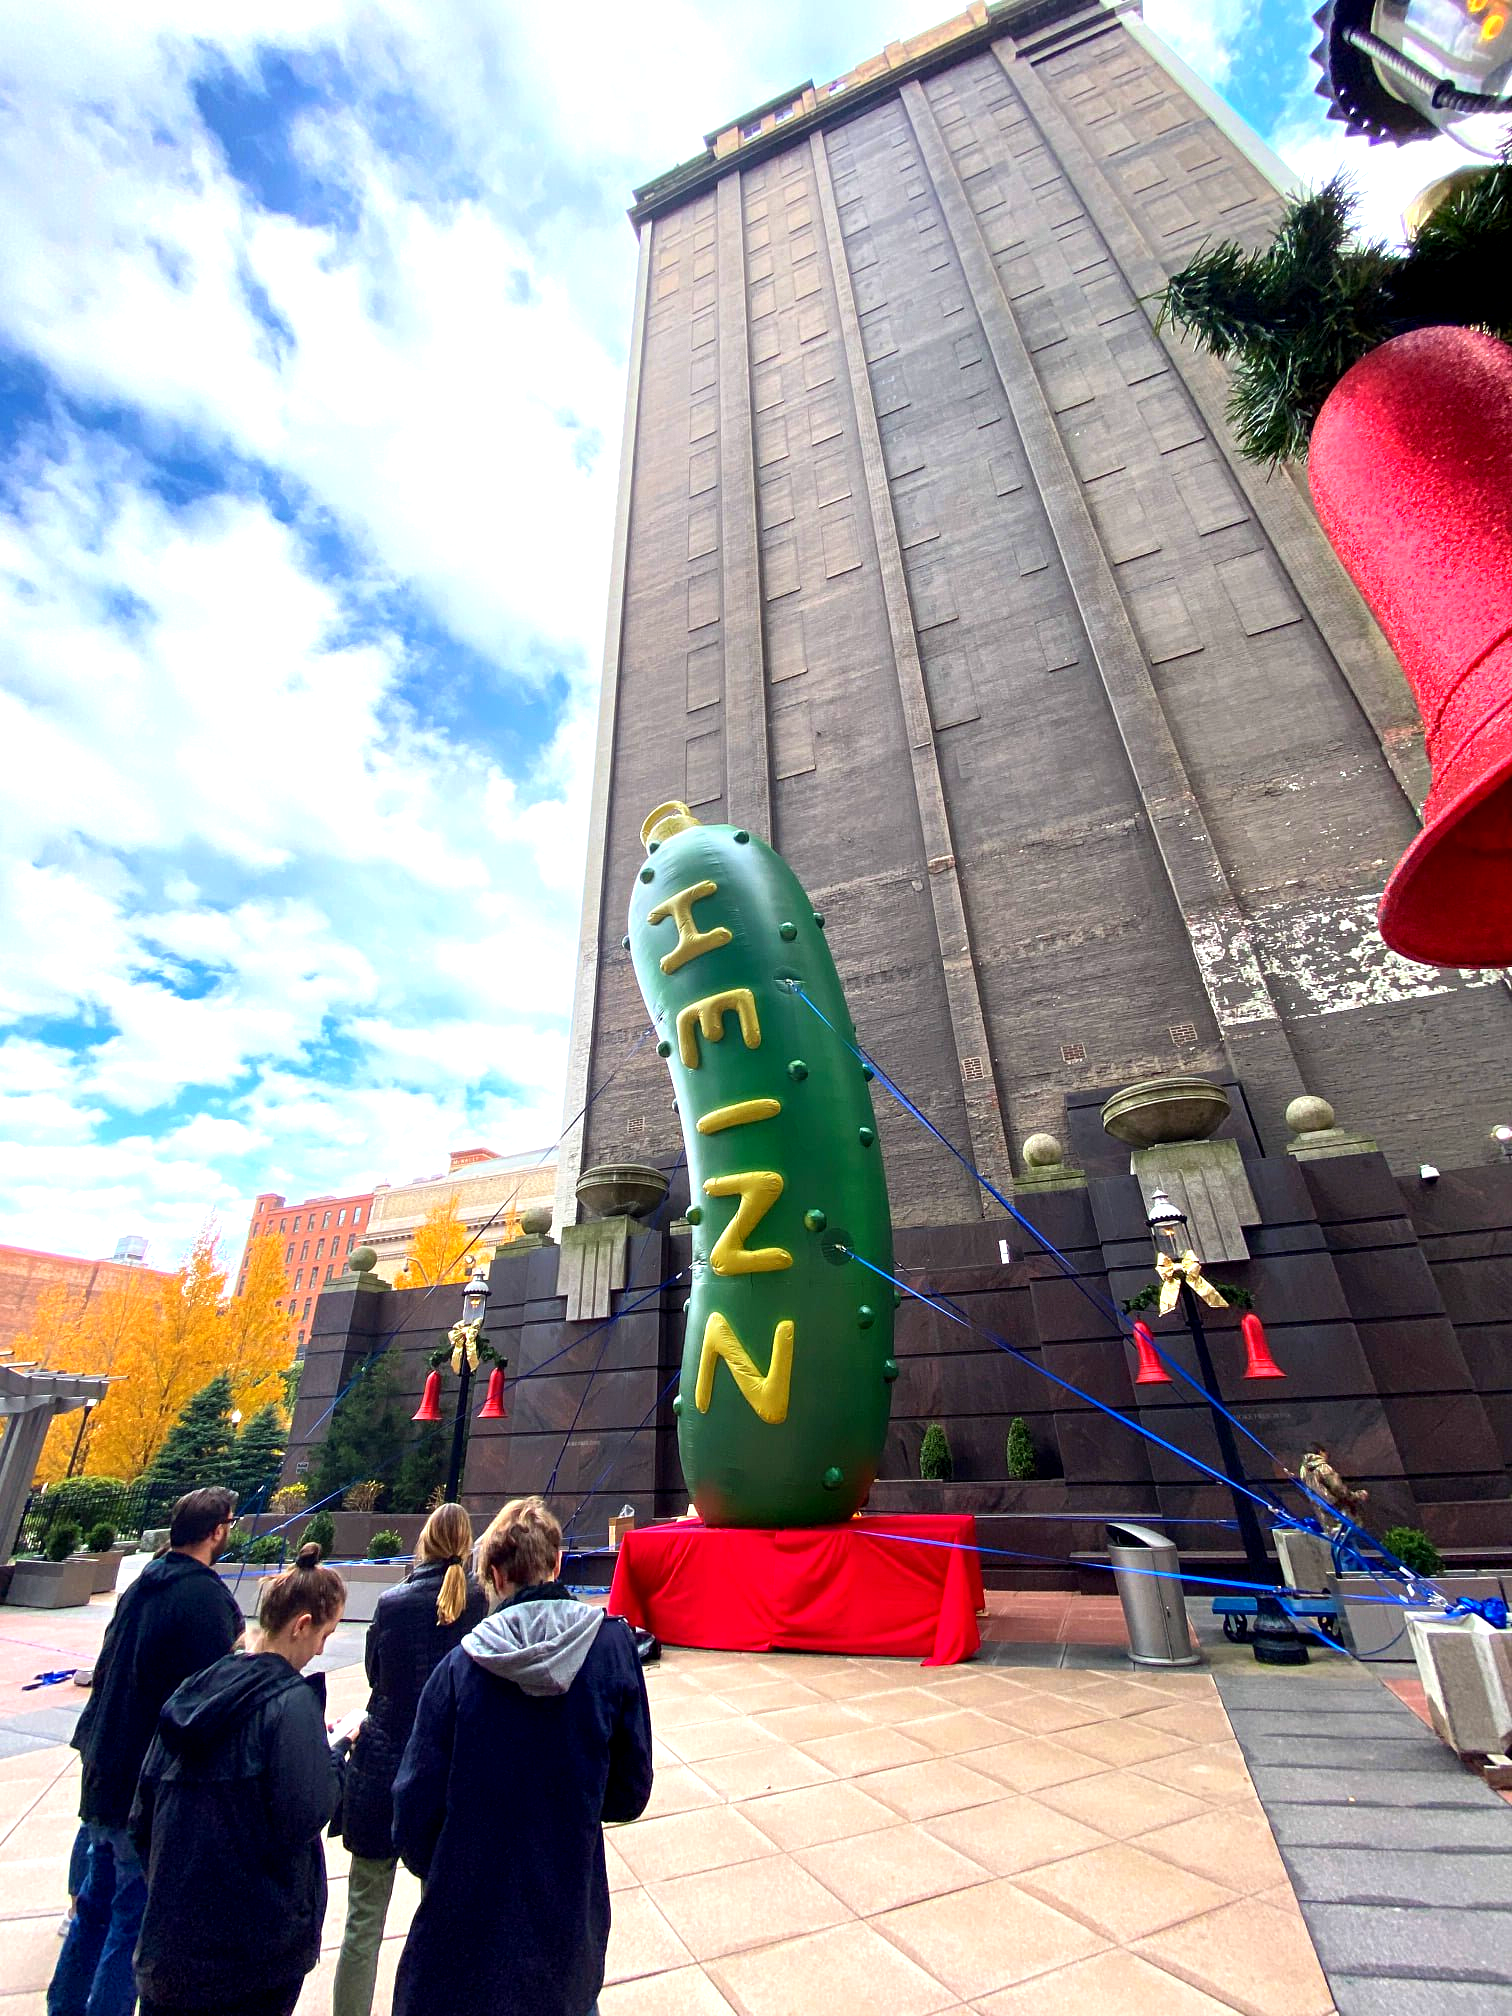 Largest Pickle Ornament: Pittsburgh's Pickle balloon sets world record